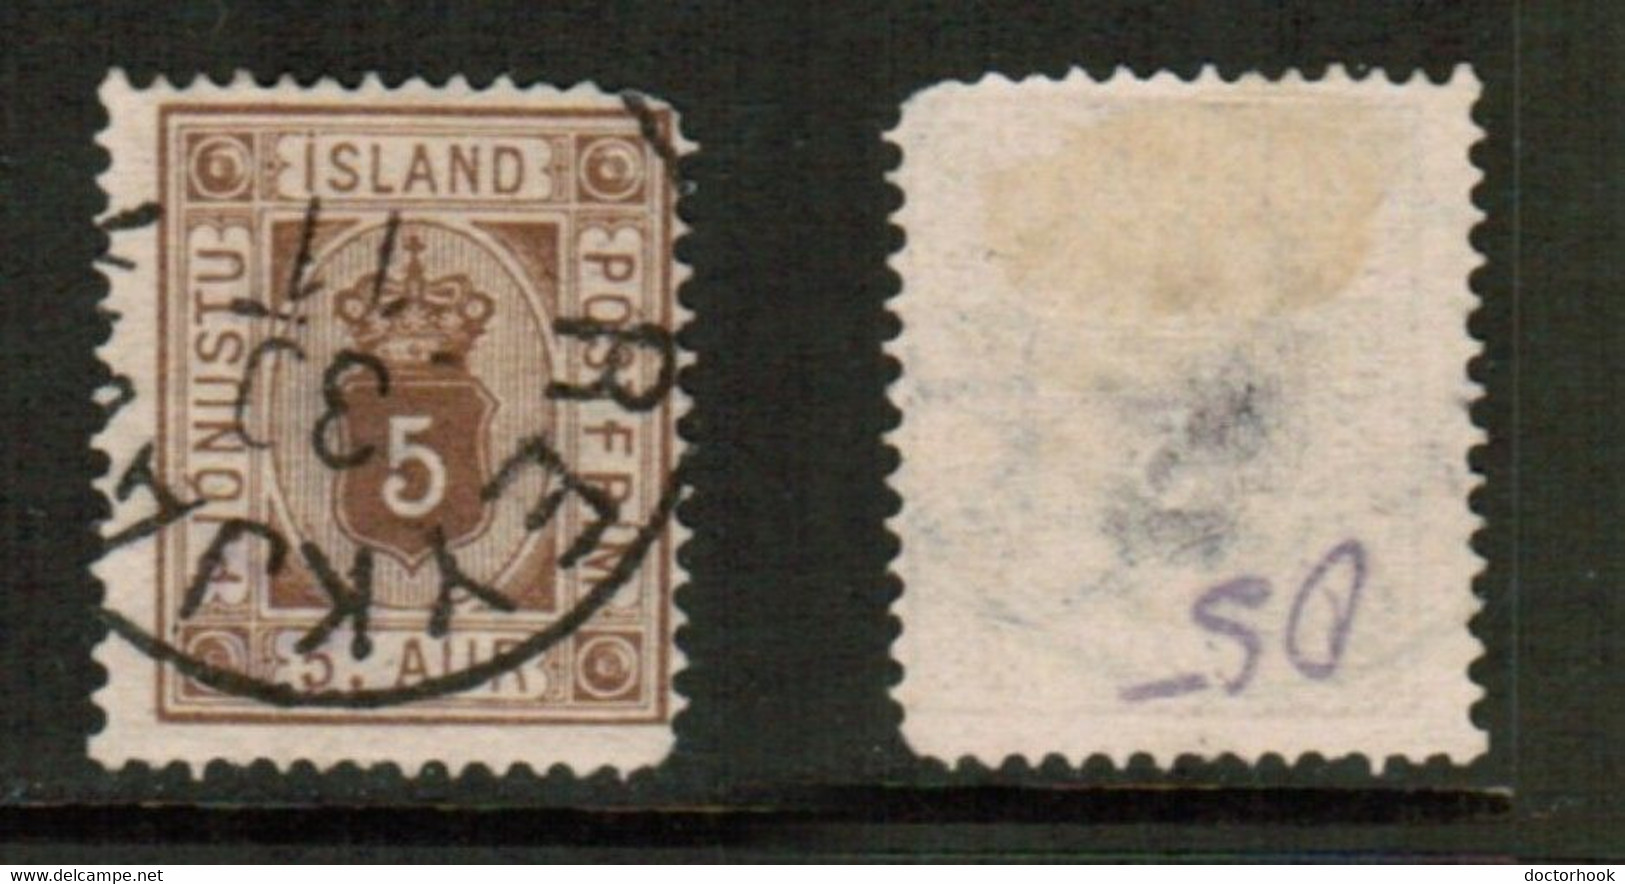 DENMARK   Scott # O 5 USED (CONDITION AS PER SCAN) (Stamp Scan # 867-18) - Service